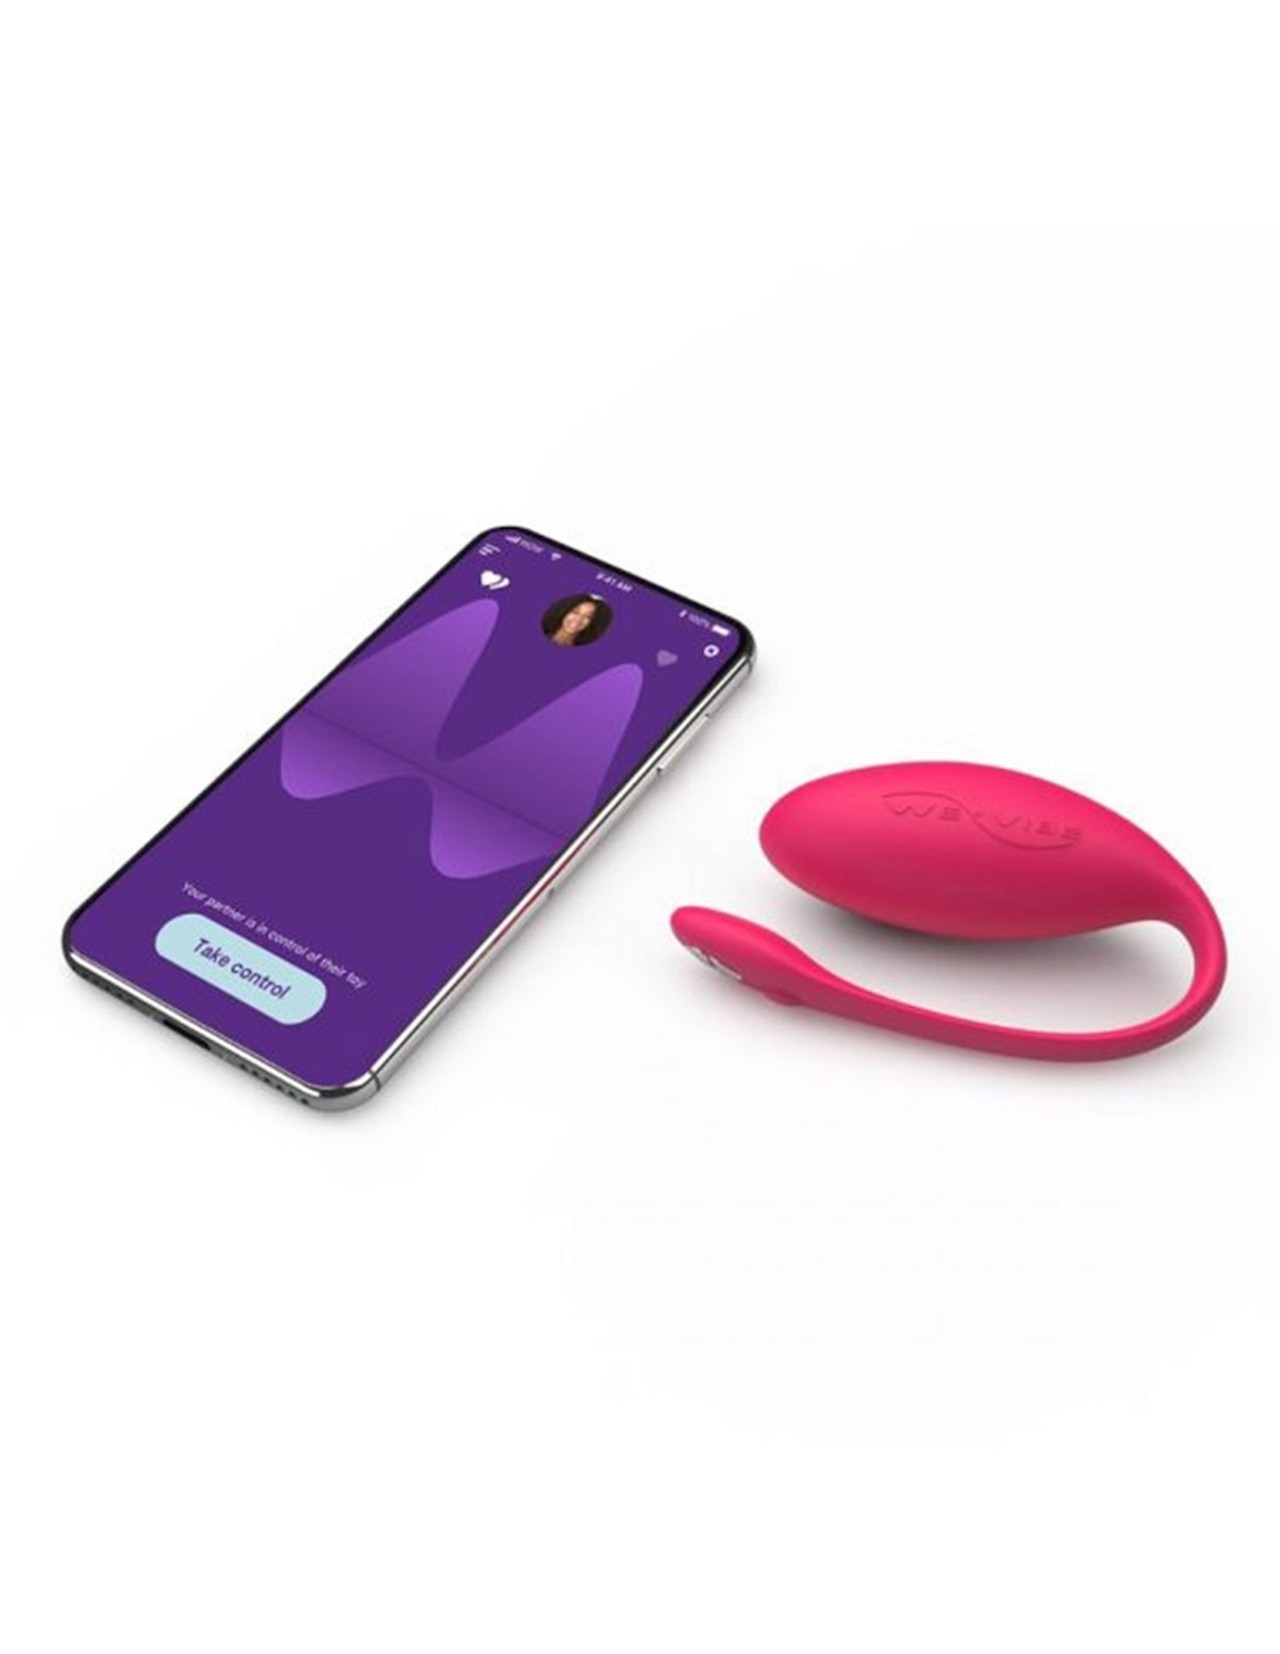 For lovers who are quarantining apart but want to get all up in there 
We-Vibe Jive Hands-Free G-Spot Vibrator, $119
Lover's Lane, various locations,  loverslane.com
Our hearts and parts go out to any couples, lovers, and side pieces who&#146;ve been unable to do the deed due to the ultimate mojo killer &#151; the pandemic. Well, there's an app for that &#151; and some fun vibrating toys to go with. The company We-Vibe offers a variety of toys that sync up with phone apps so lovers near or far can play along. For those with a neglected G-spot, there's the Jive Hands-Free G-Spot Vibrator that pairs with the app that allows for customizable vibration patterns. There are penis rings, too, which can also be controlled via an app but, if used with a partner, can provide some fun rumbles for them, too. 
Photo via  loverslane.com